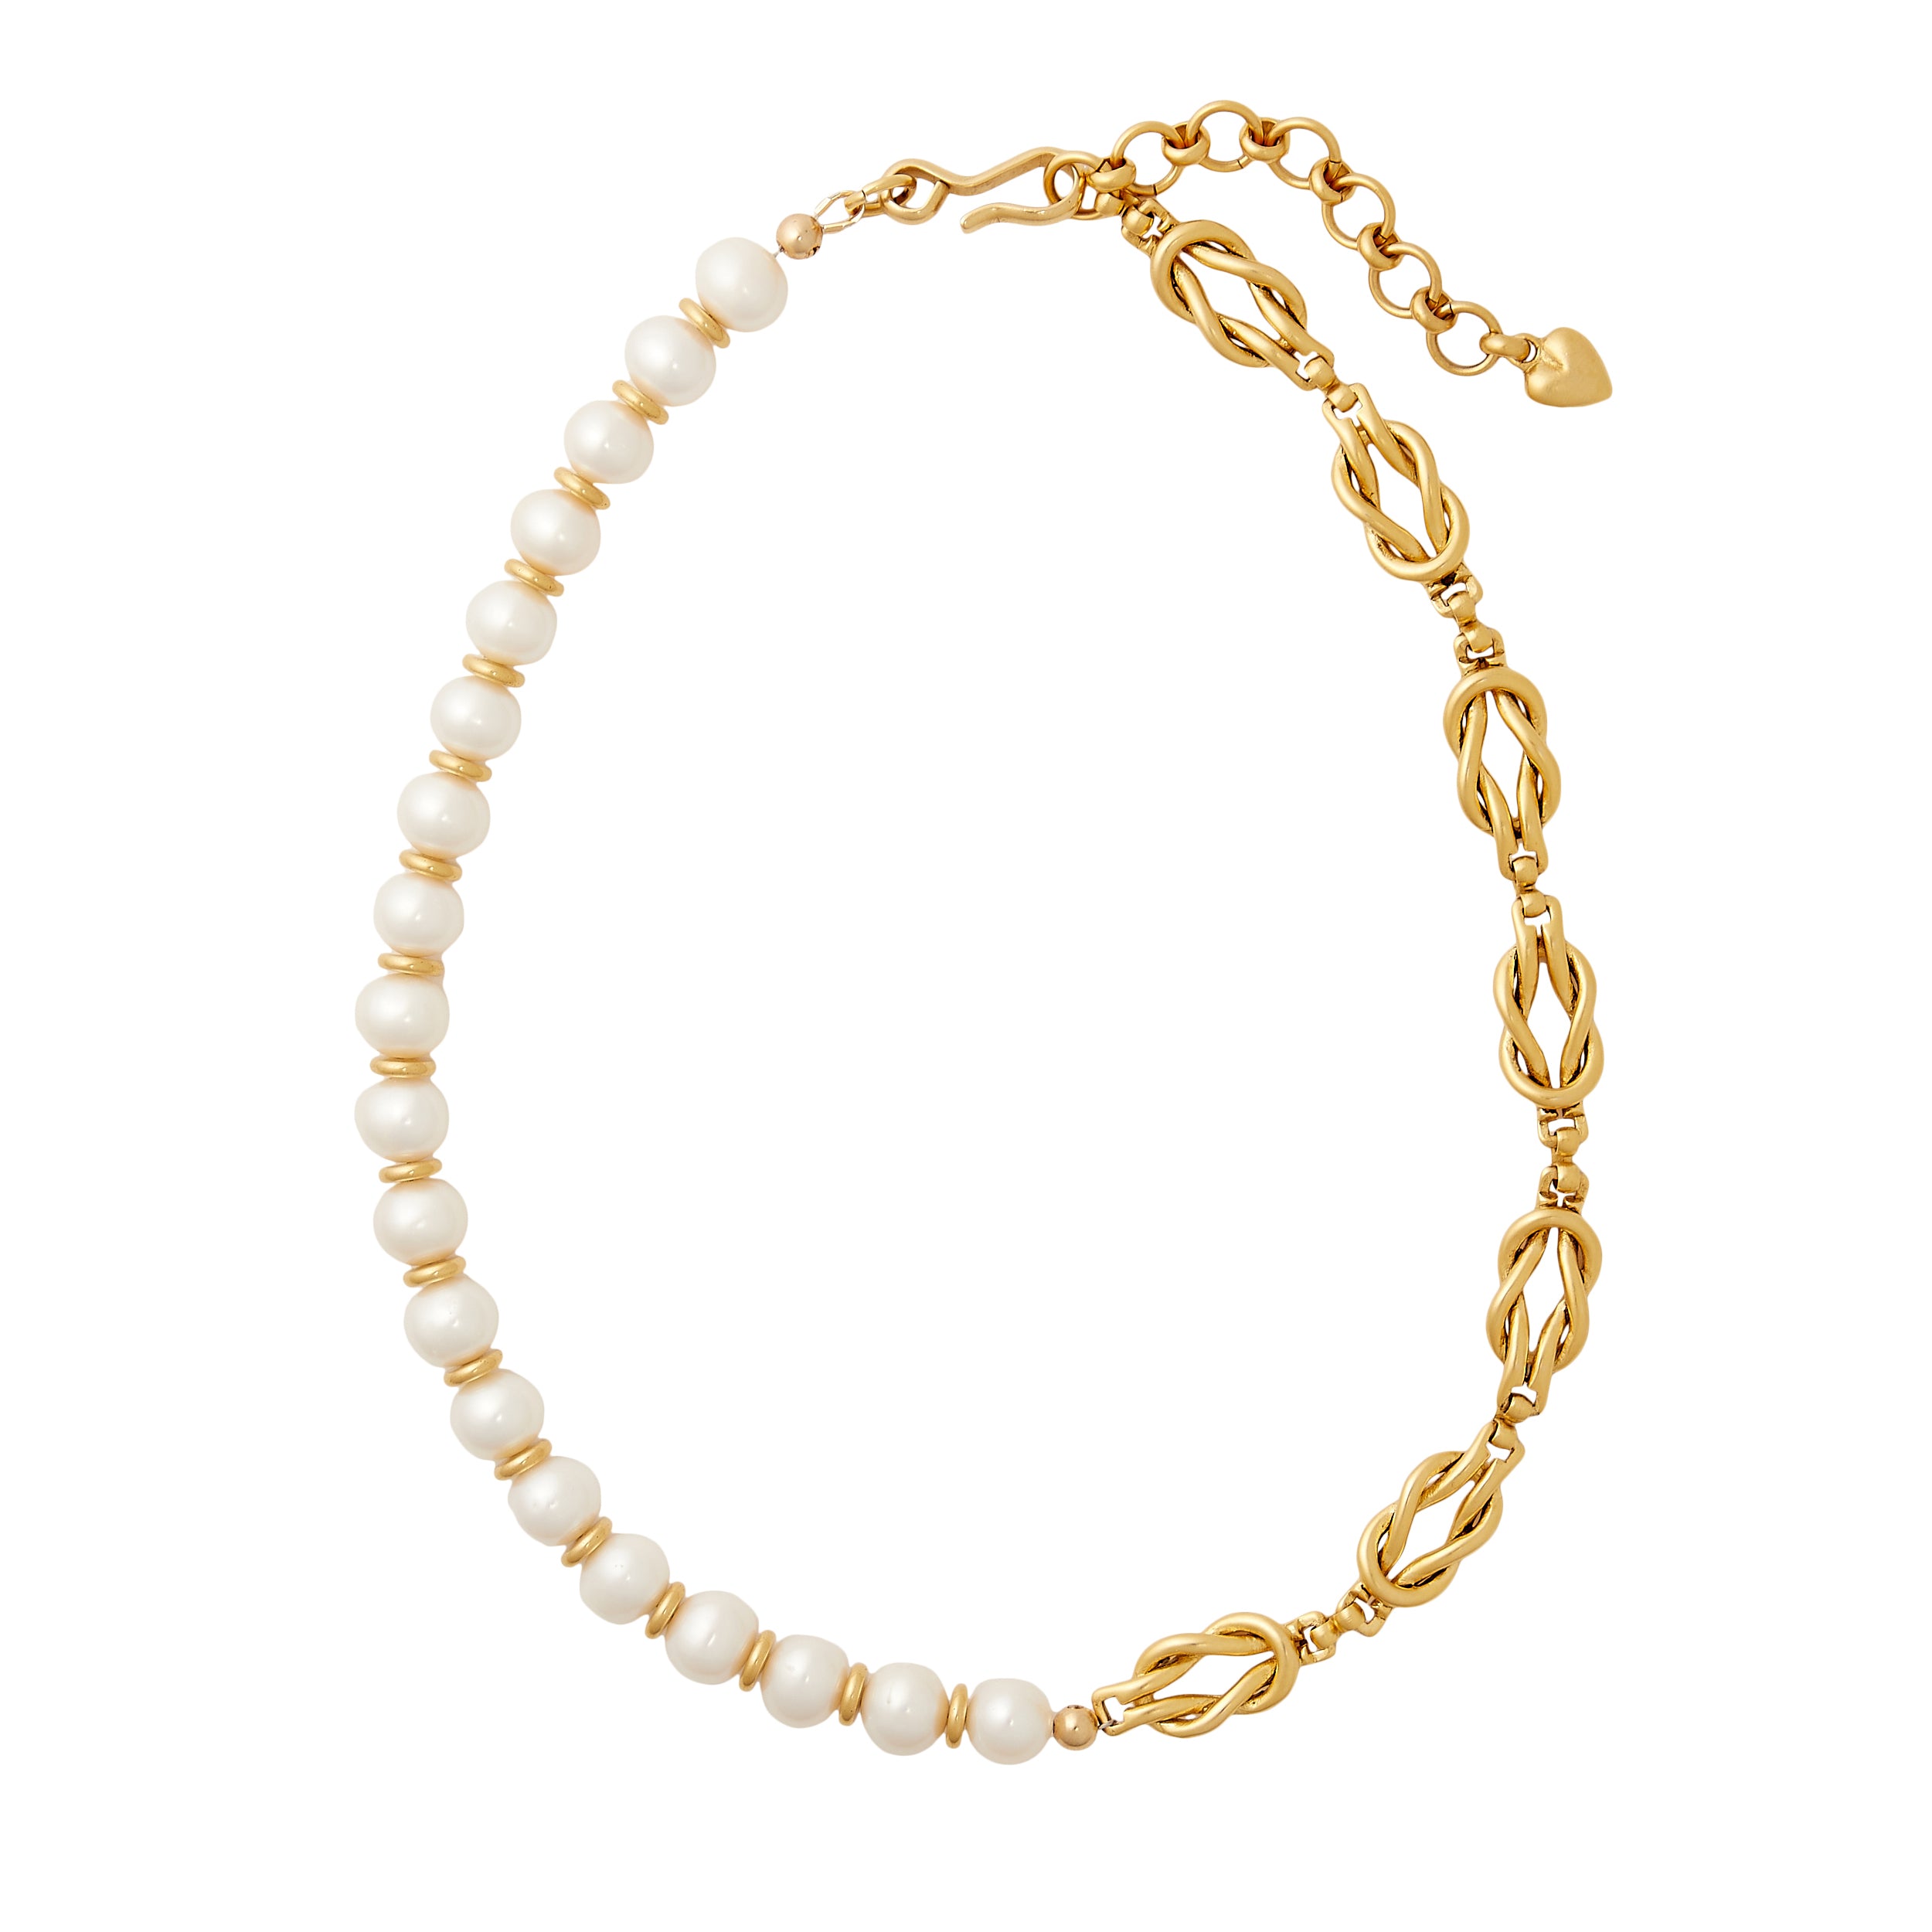 Goldtone and Pearl-Effect Chain Choker Necklaces - 3 Pack - Spencer's